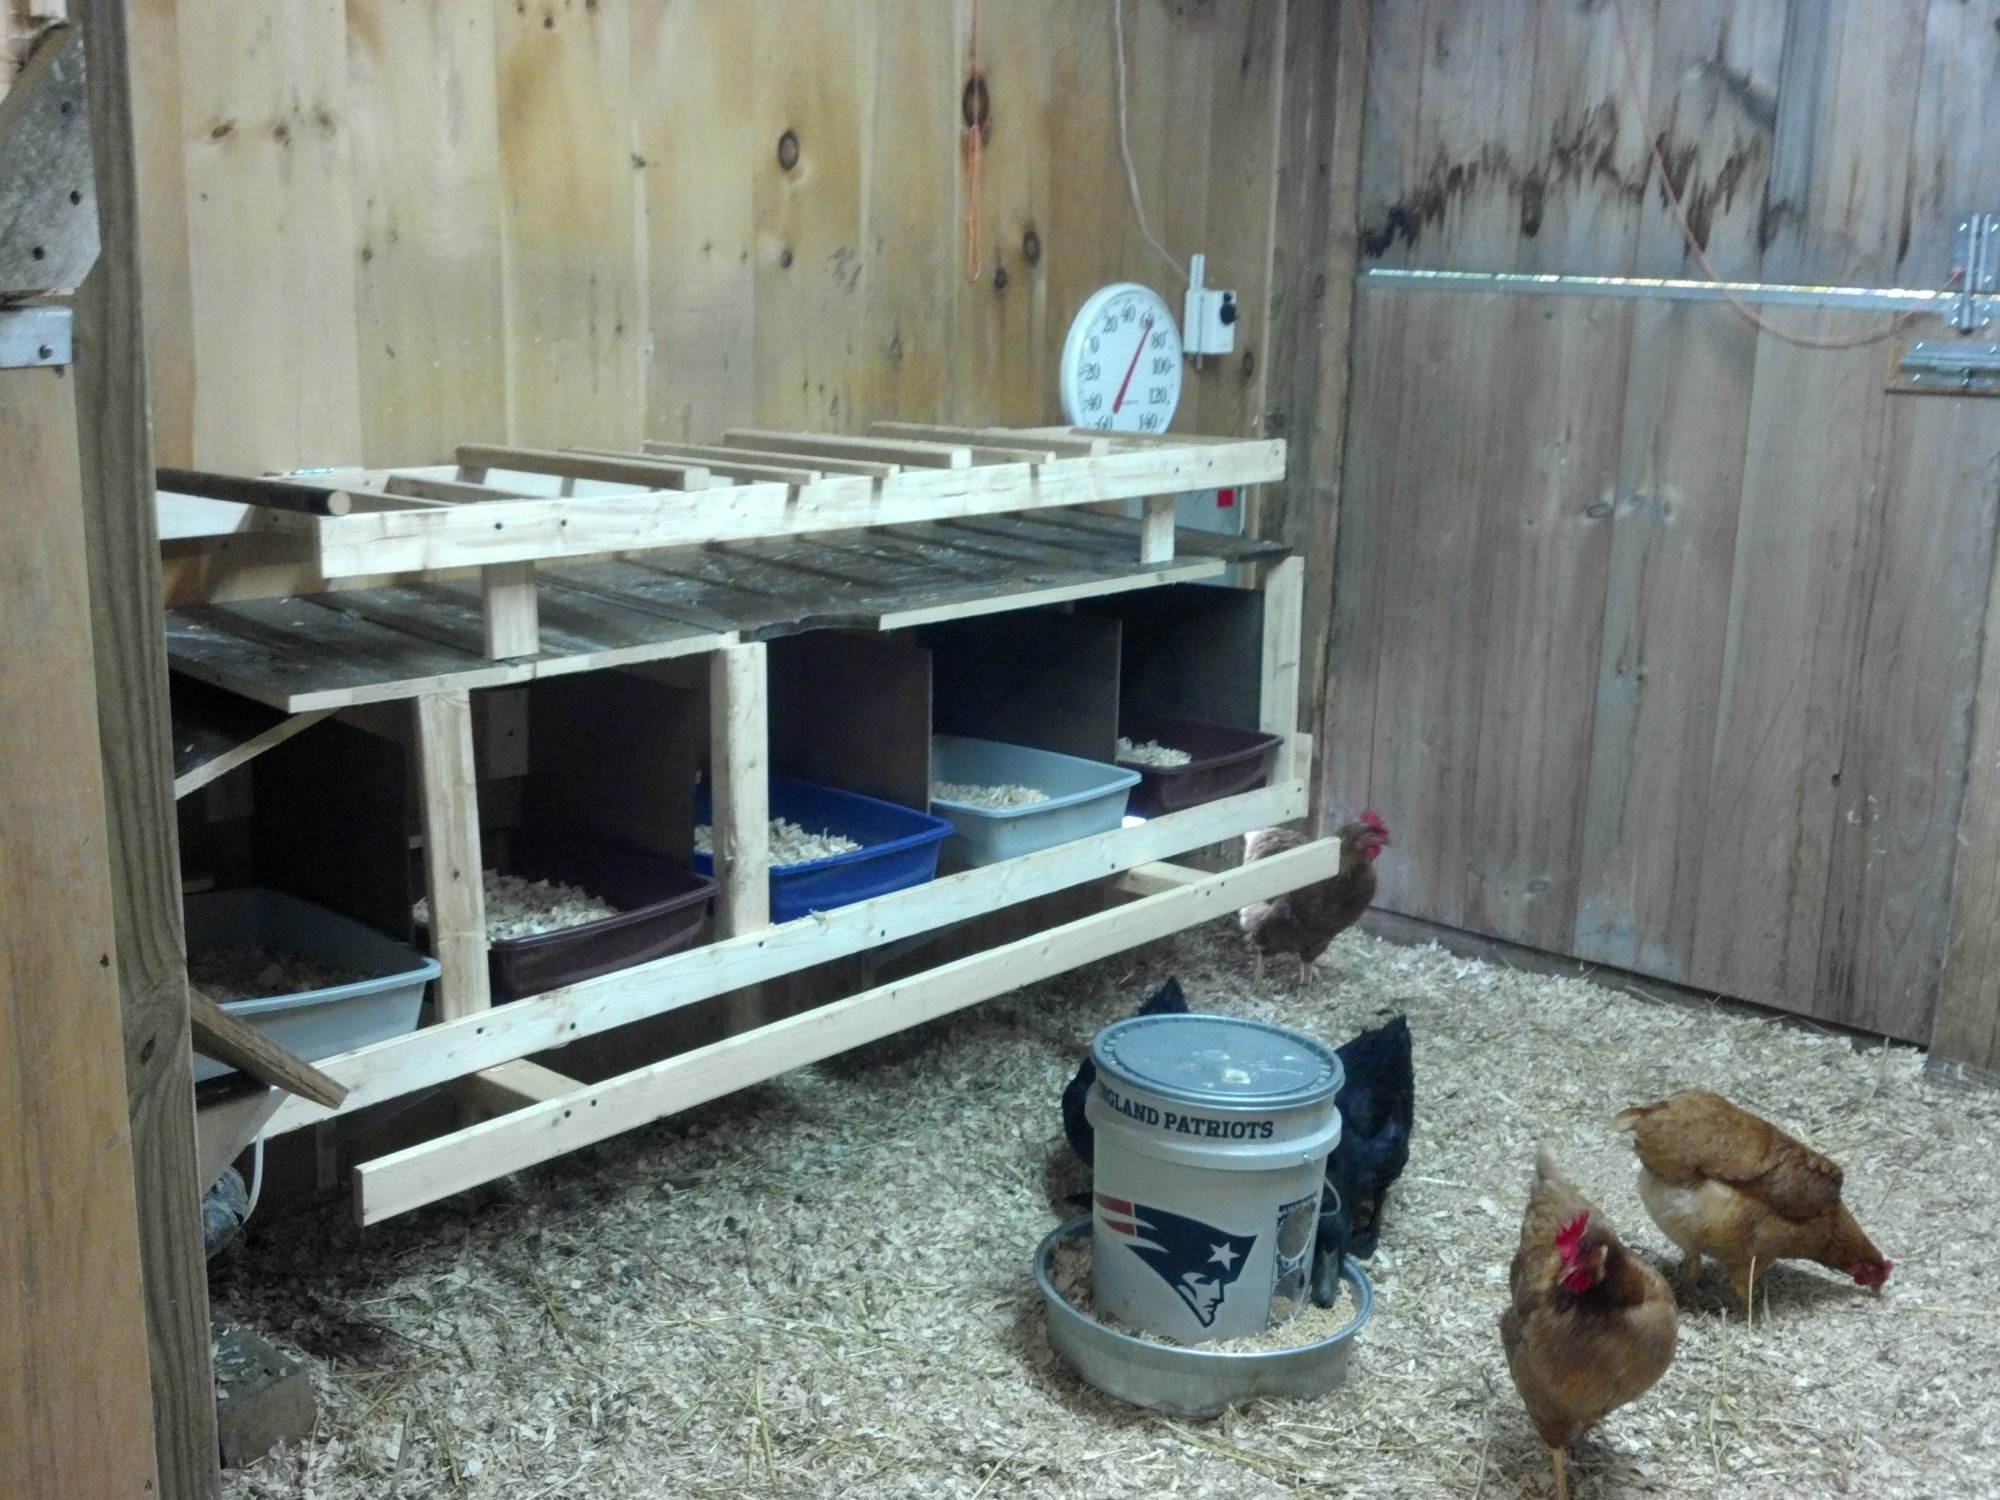  maintenance coop, good ideas for any coop - BackYard Chickens